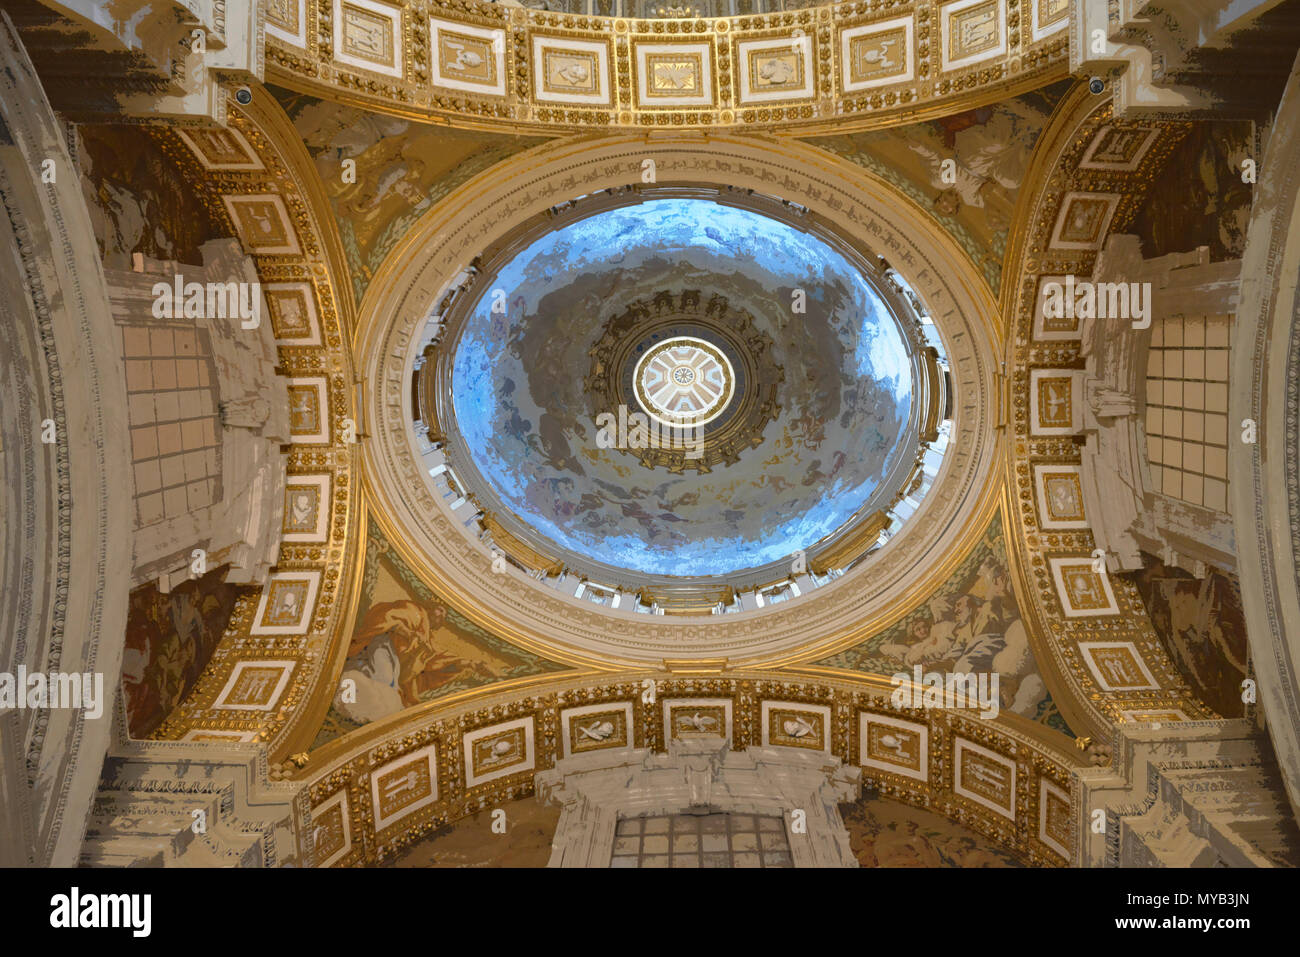 Saint Peter's Basilica, interior, small dome (cupola) at the end of the north aisle (rendered in PS), Vatican City, Rome, Italy Stock Photo